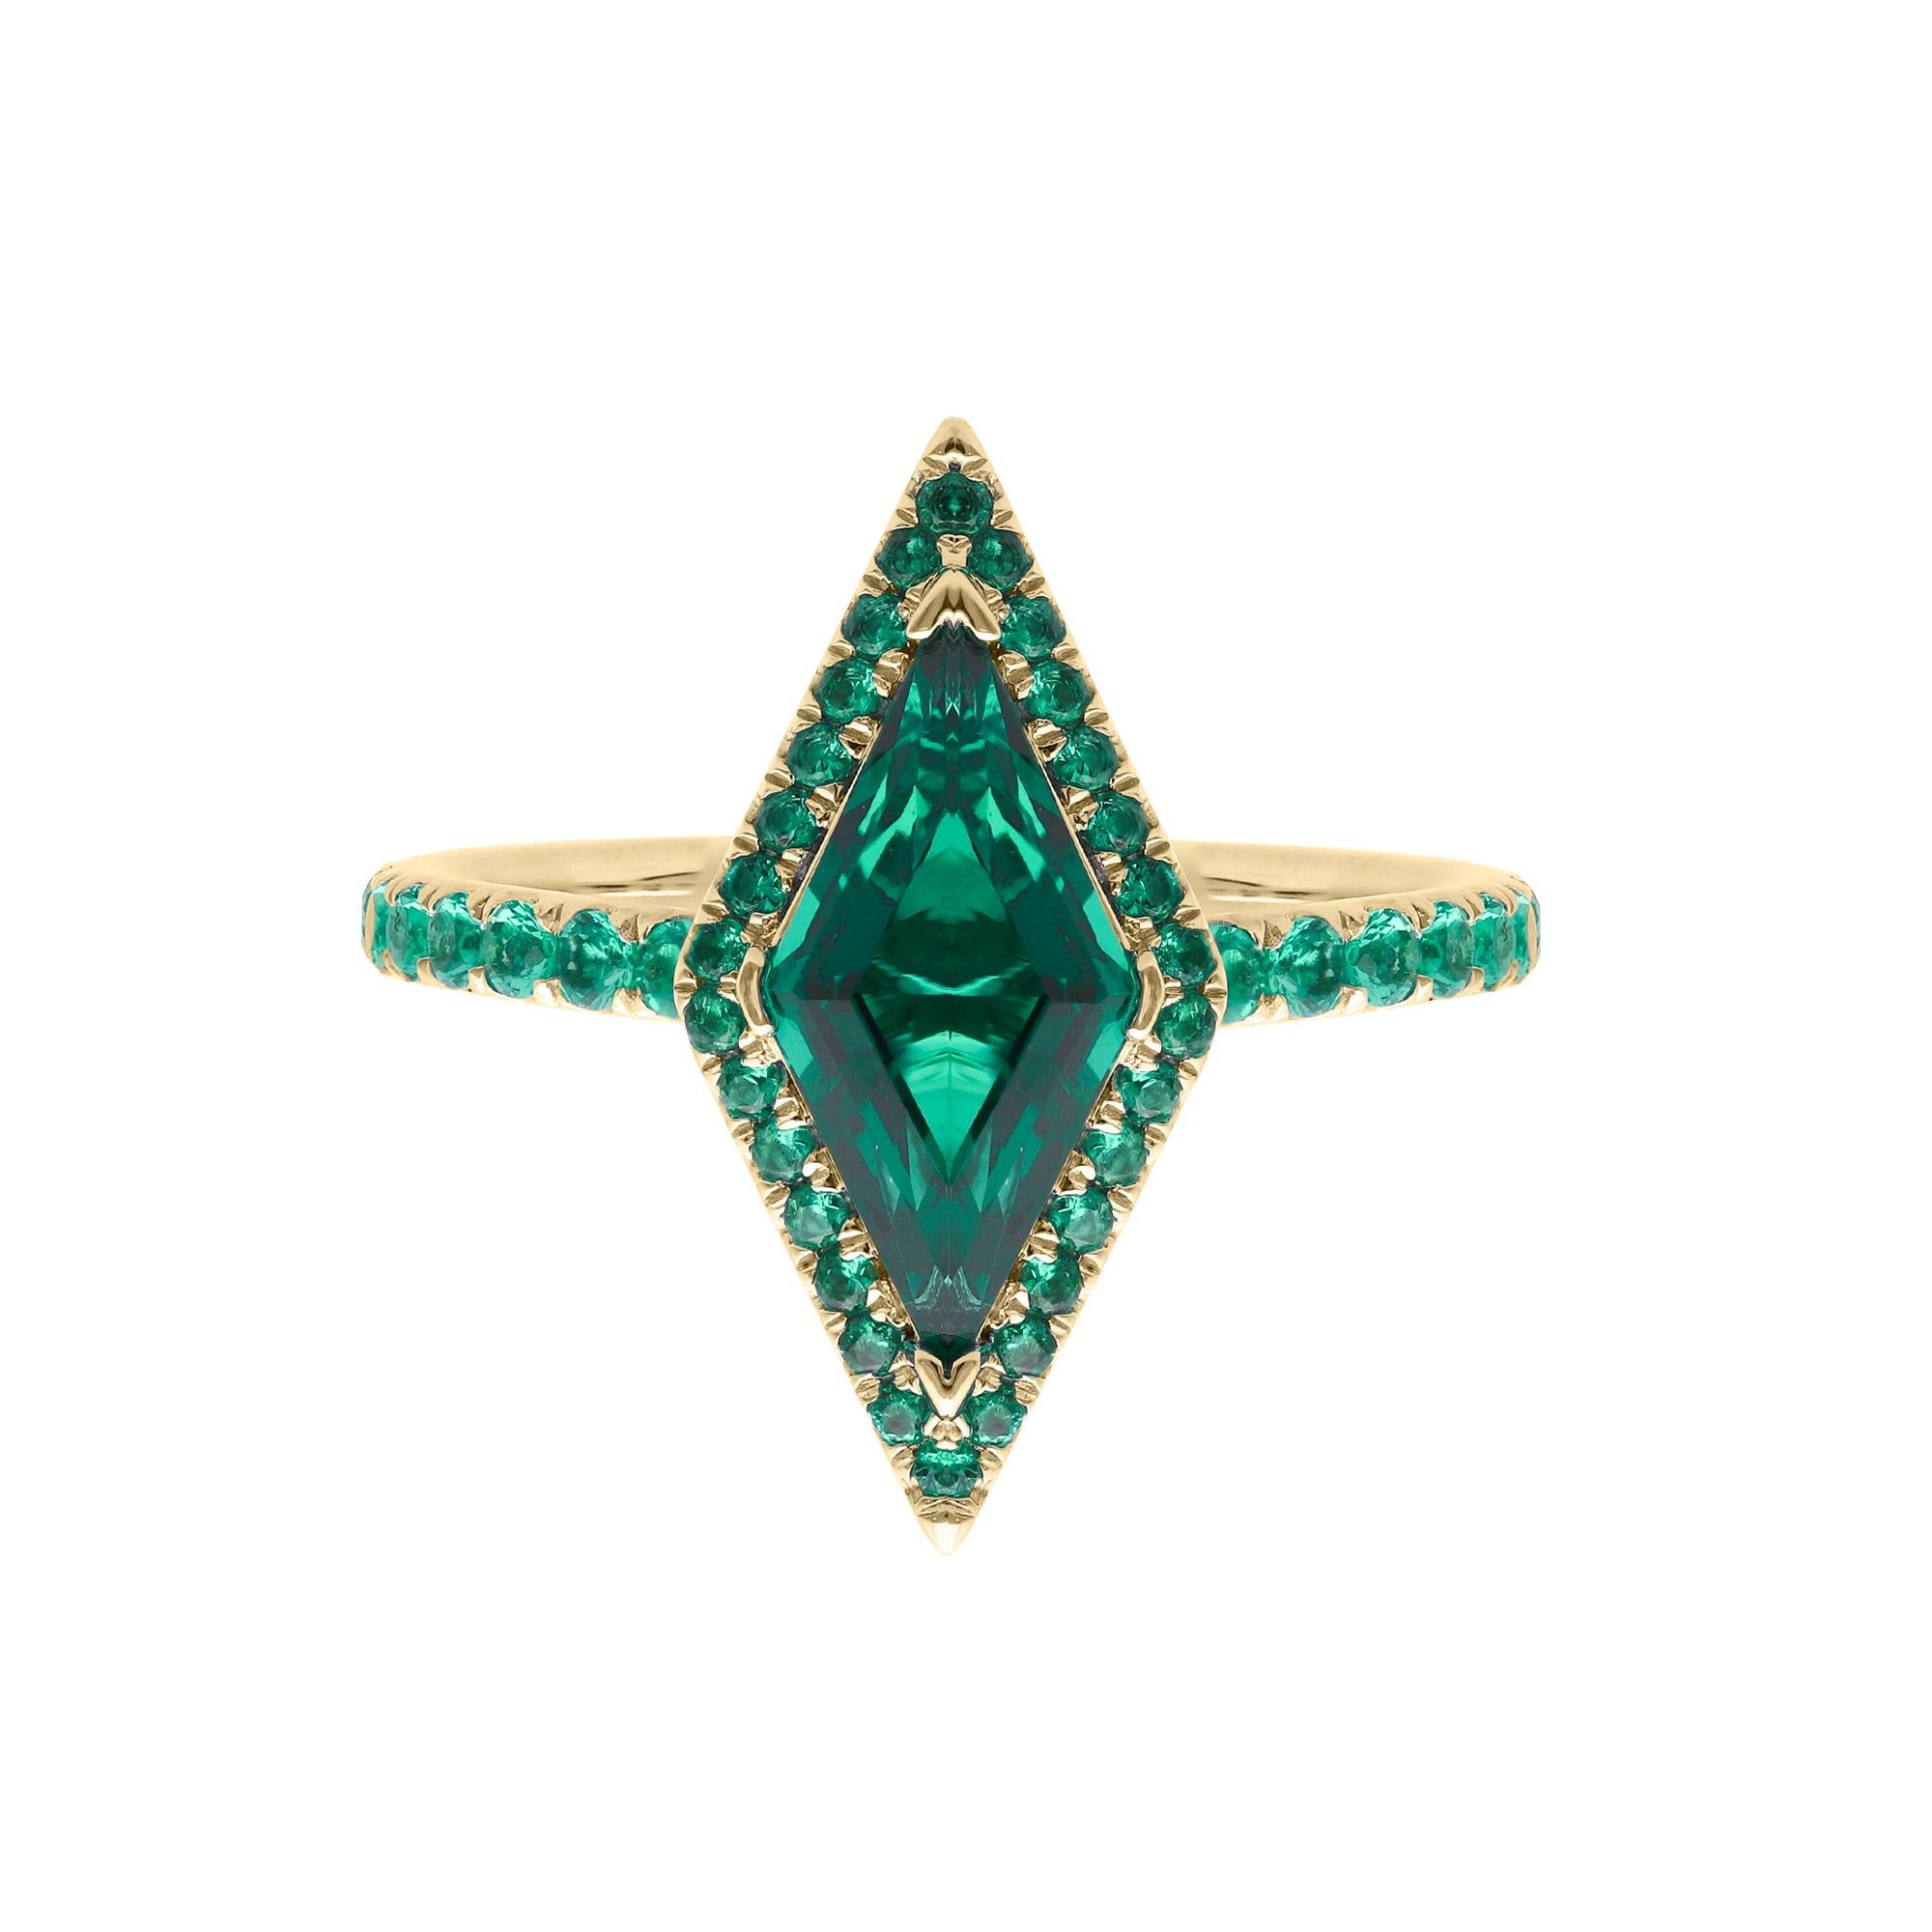 For Sale:  1.50 Carat Emerald Lozenge Ring, Green, Round Emerald Pave, 10kt Yellow Gold 4